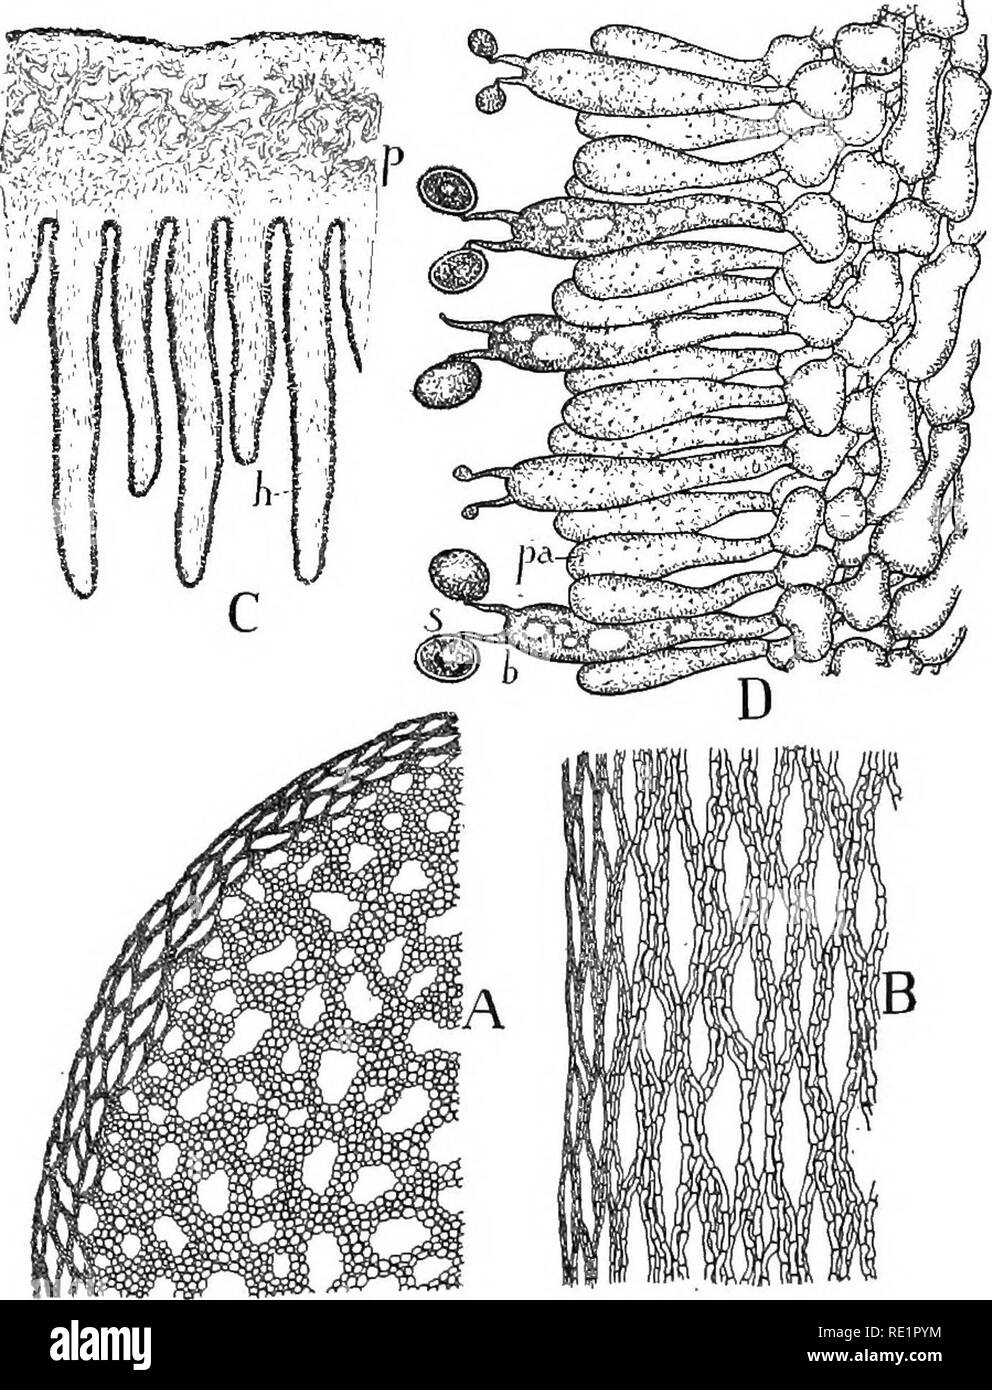 . Nature and development of plants. Botany. DEVELOPMENT OF PLANTS 263 a sereveral very widely distributed and familiar families of the Agaricales, distinguished by the arrangement and distribution of the hymenium. A. Thelephoraceae.—These fungi form membranous, leathery. Fig. 171. Structure of a mushroom: A and B, cross and longitudinal sections of a portion of the stipe, showing the character and arrangement of the hyphae that make up the mushroom. C, tangential view of the gills —p, pileus; h, hymenium appearing as a dark band on the surface of the gills. D, a portion of the hymenium enlarge Stock Photo